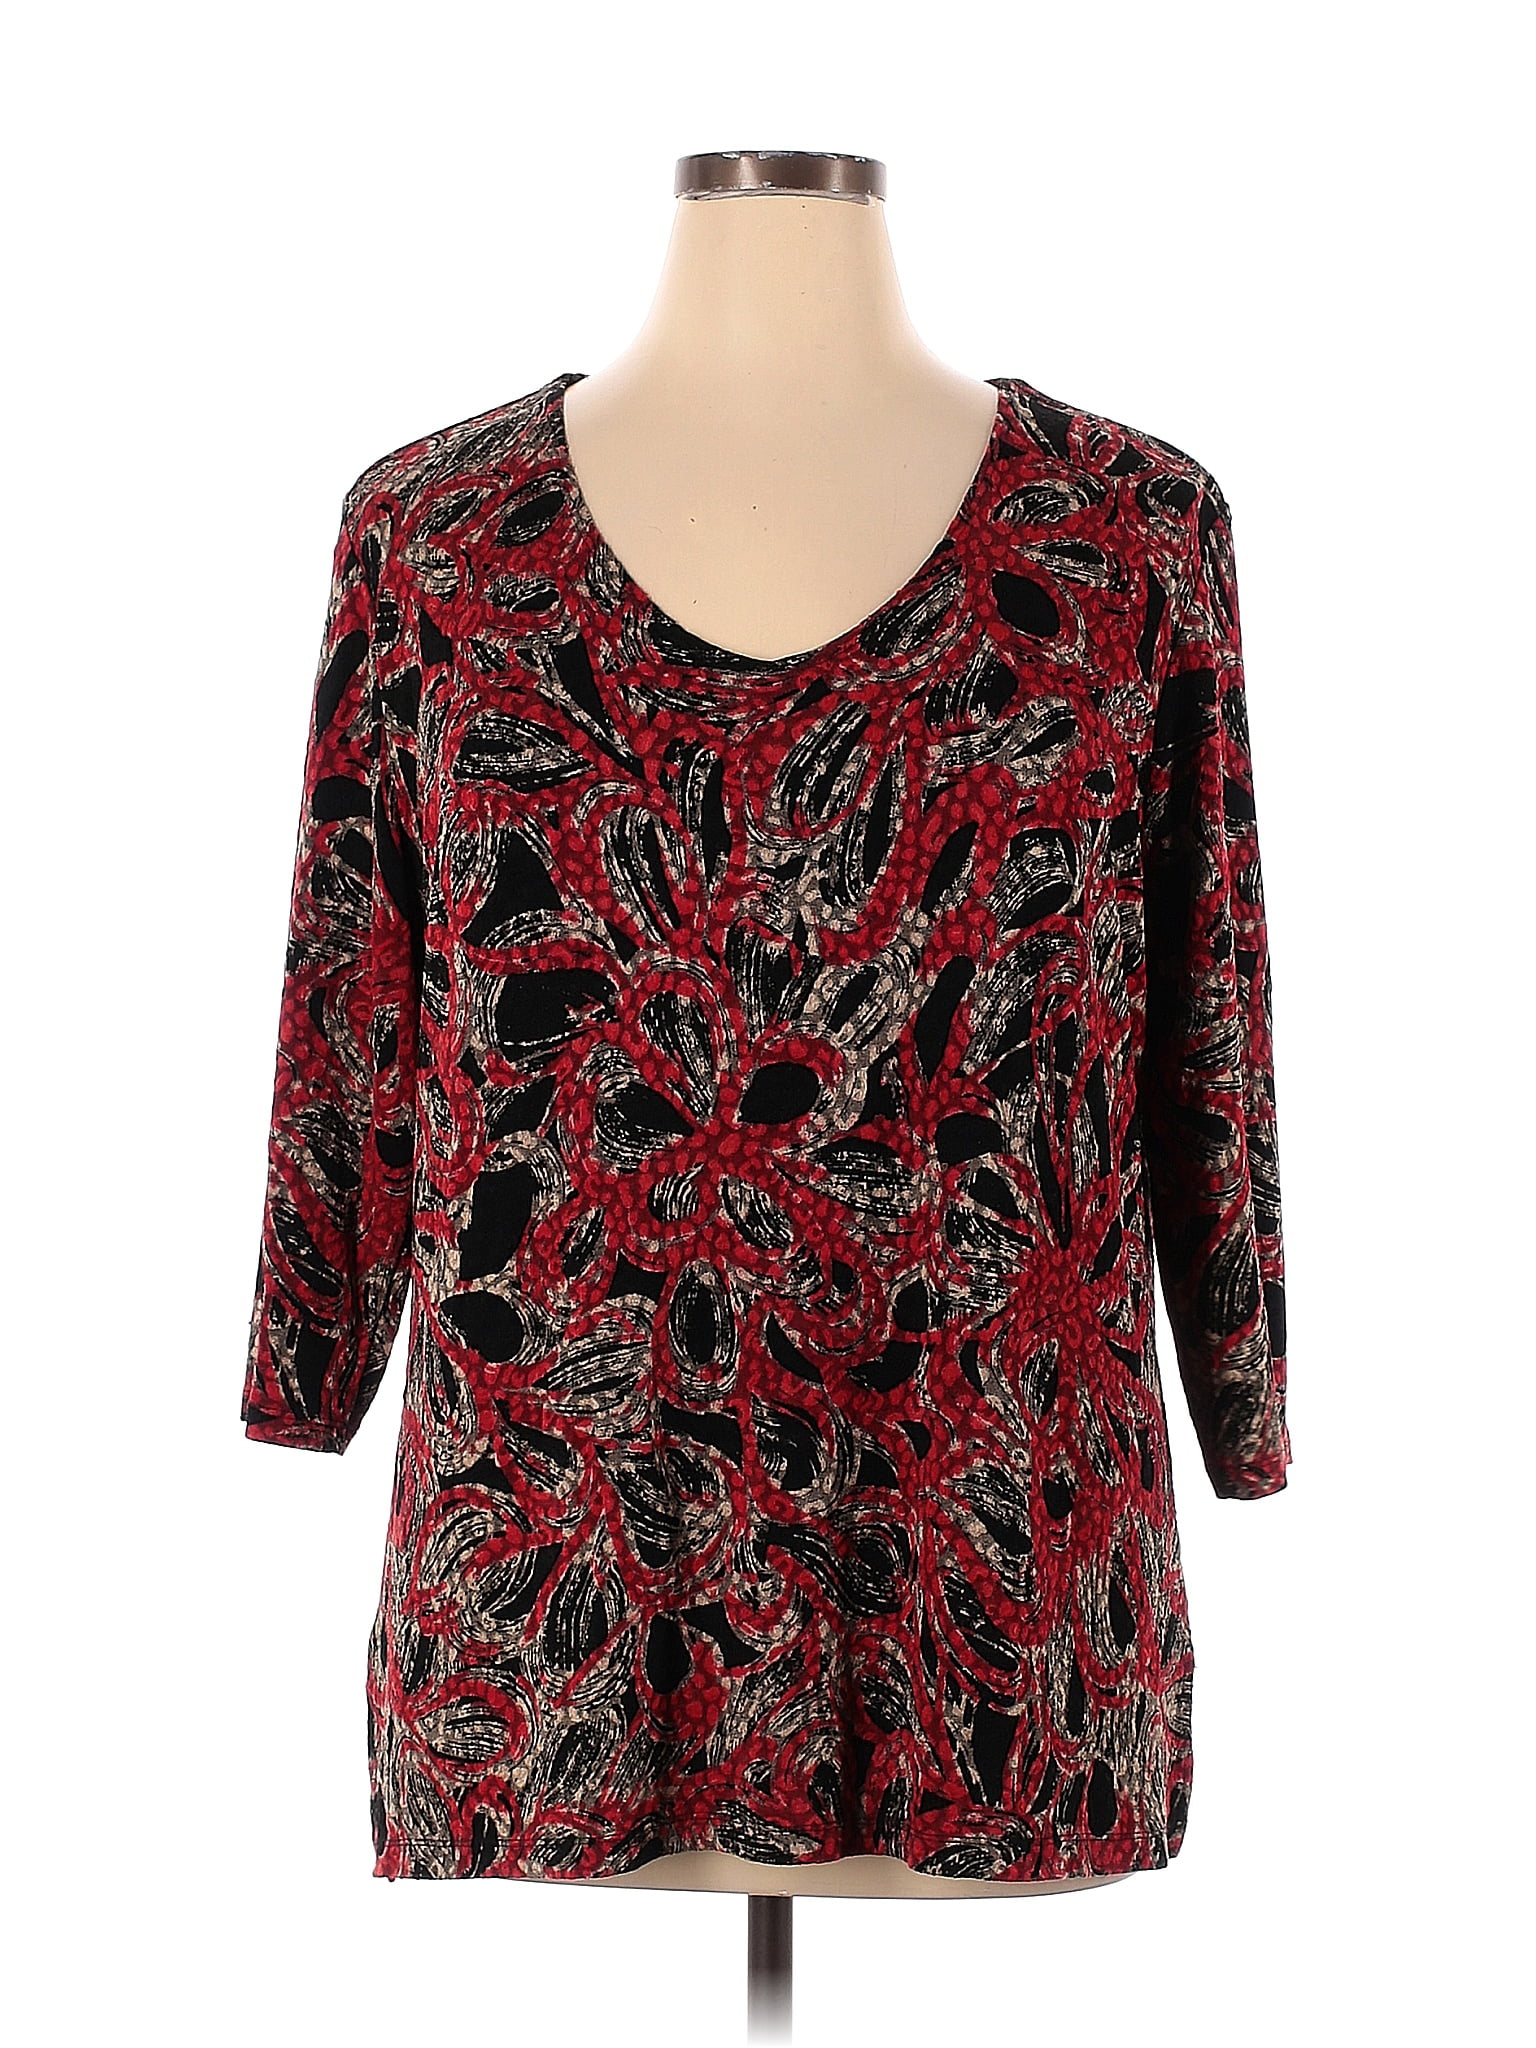 JM Collection Paisley Red Long Sleeve T-Shirt Size 1X (Plus) - 20% off ...